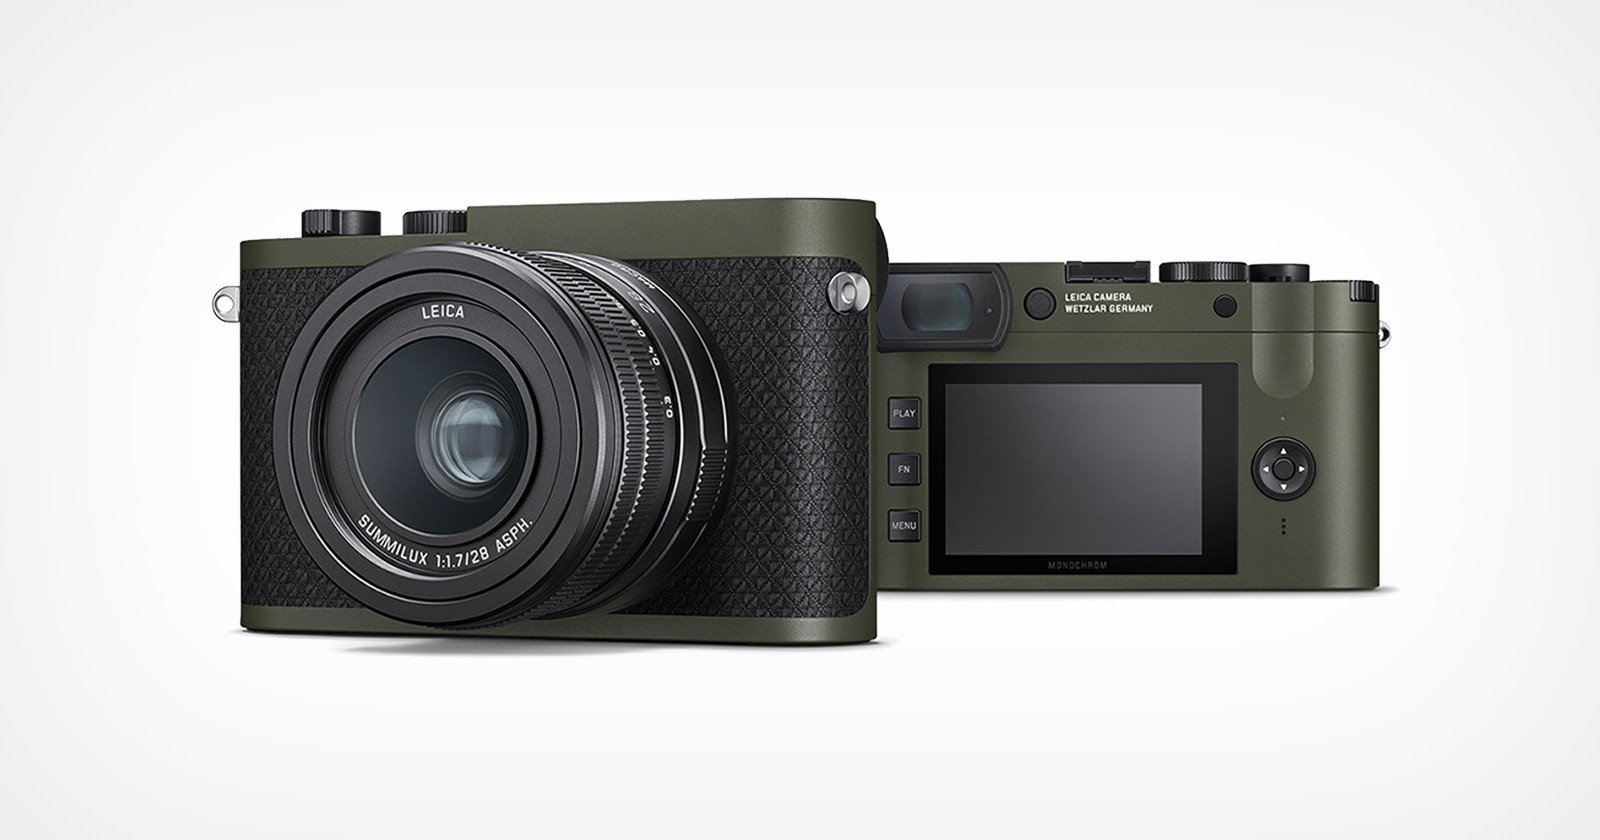  leica releases kevlar-wrapped monochrom reporter edition 